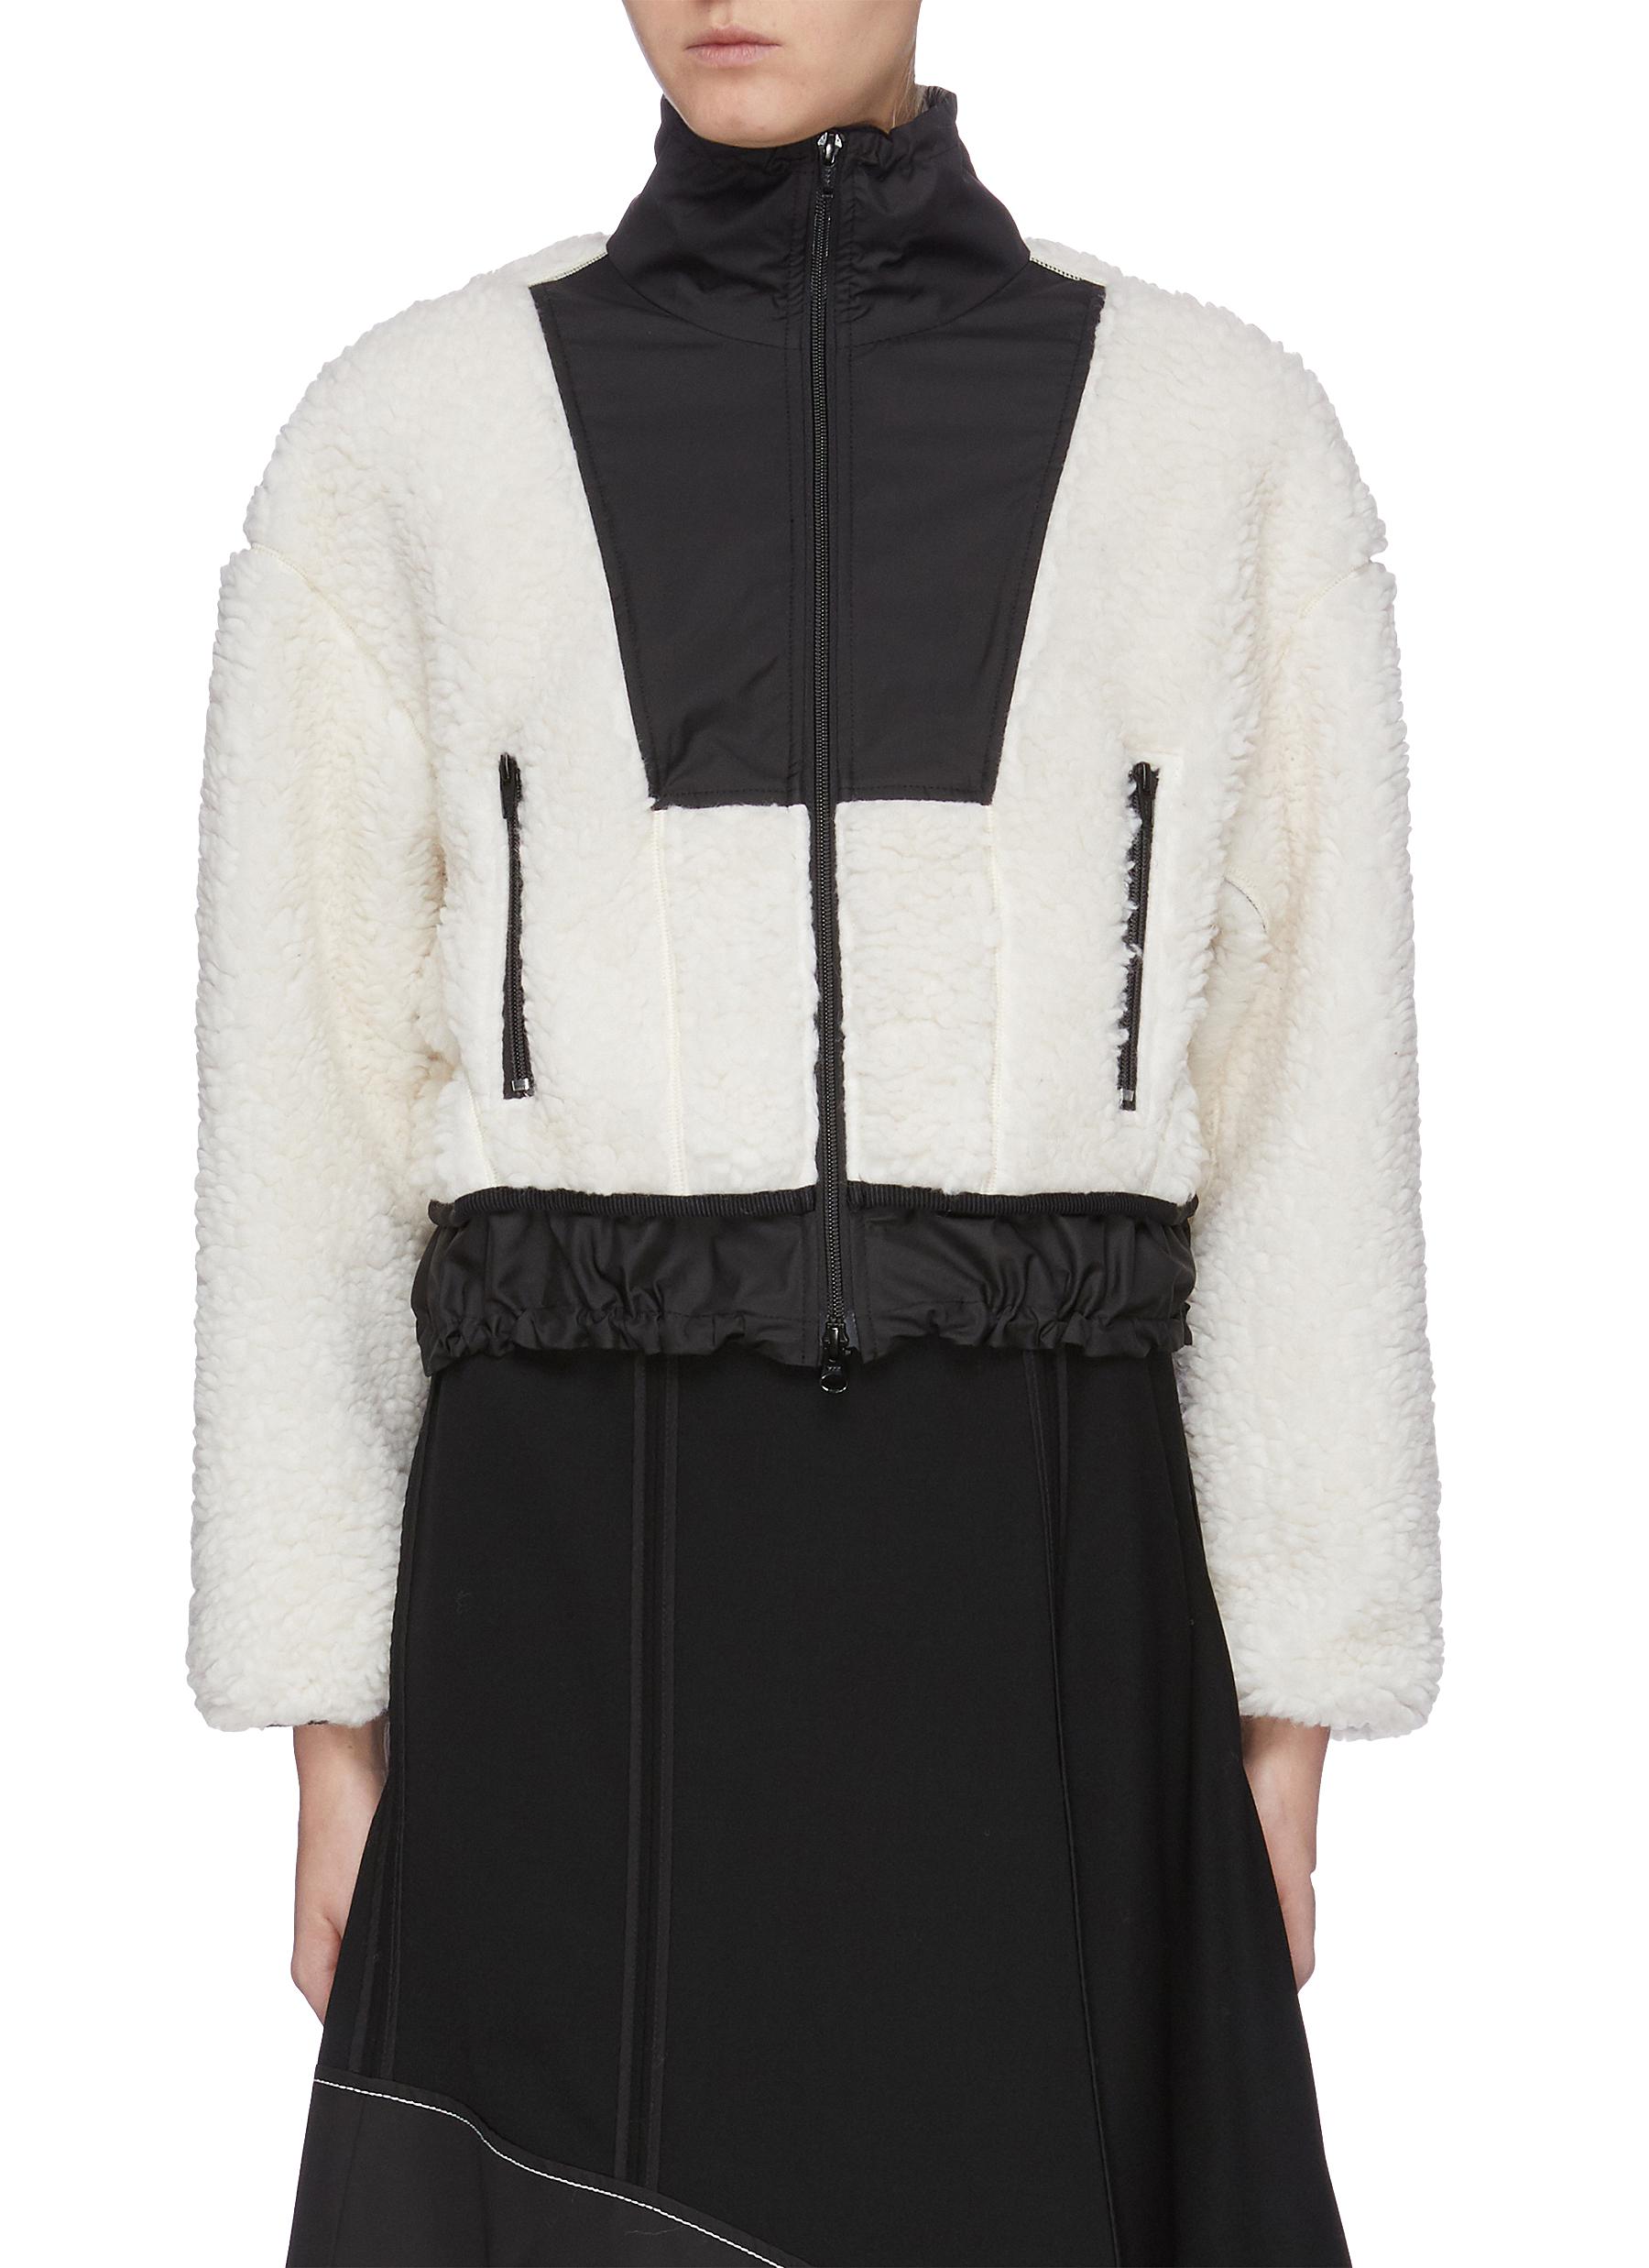 Contrast bib shearling cropped high neck bomber jacket by 3.1 Phillip Lim